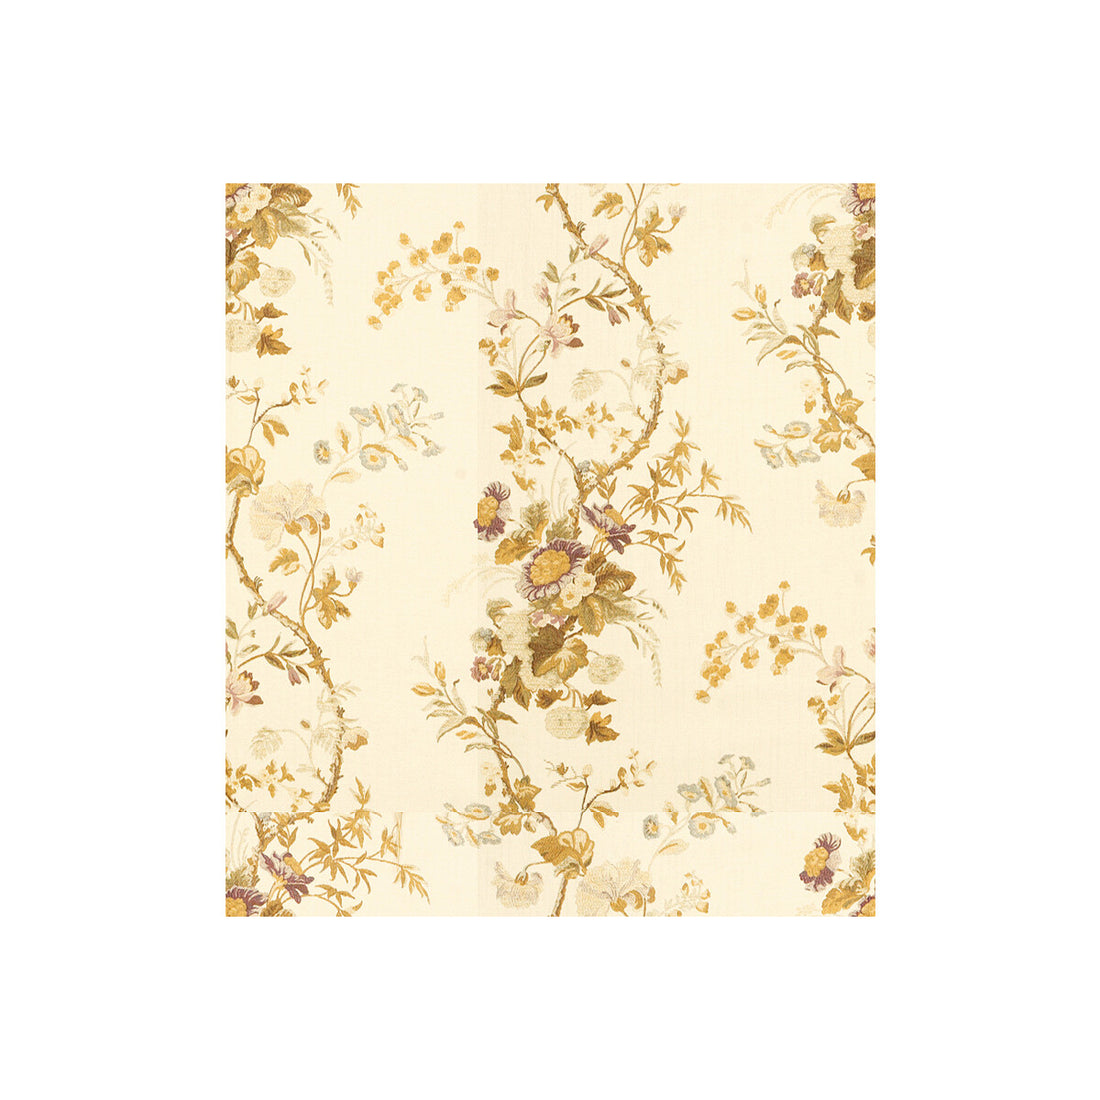 Summer Palace fabric in fig color - pattern 30739.1610.0 - by Kravet Couture in the Modern Colors II collection